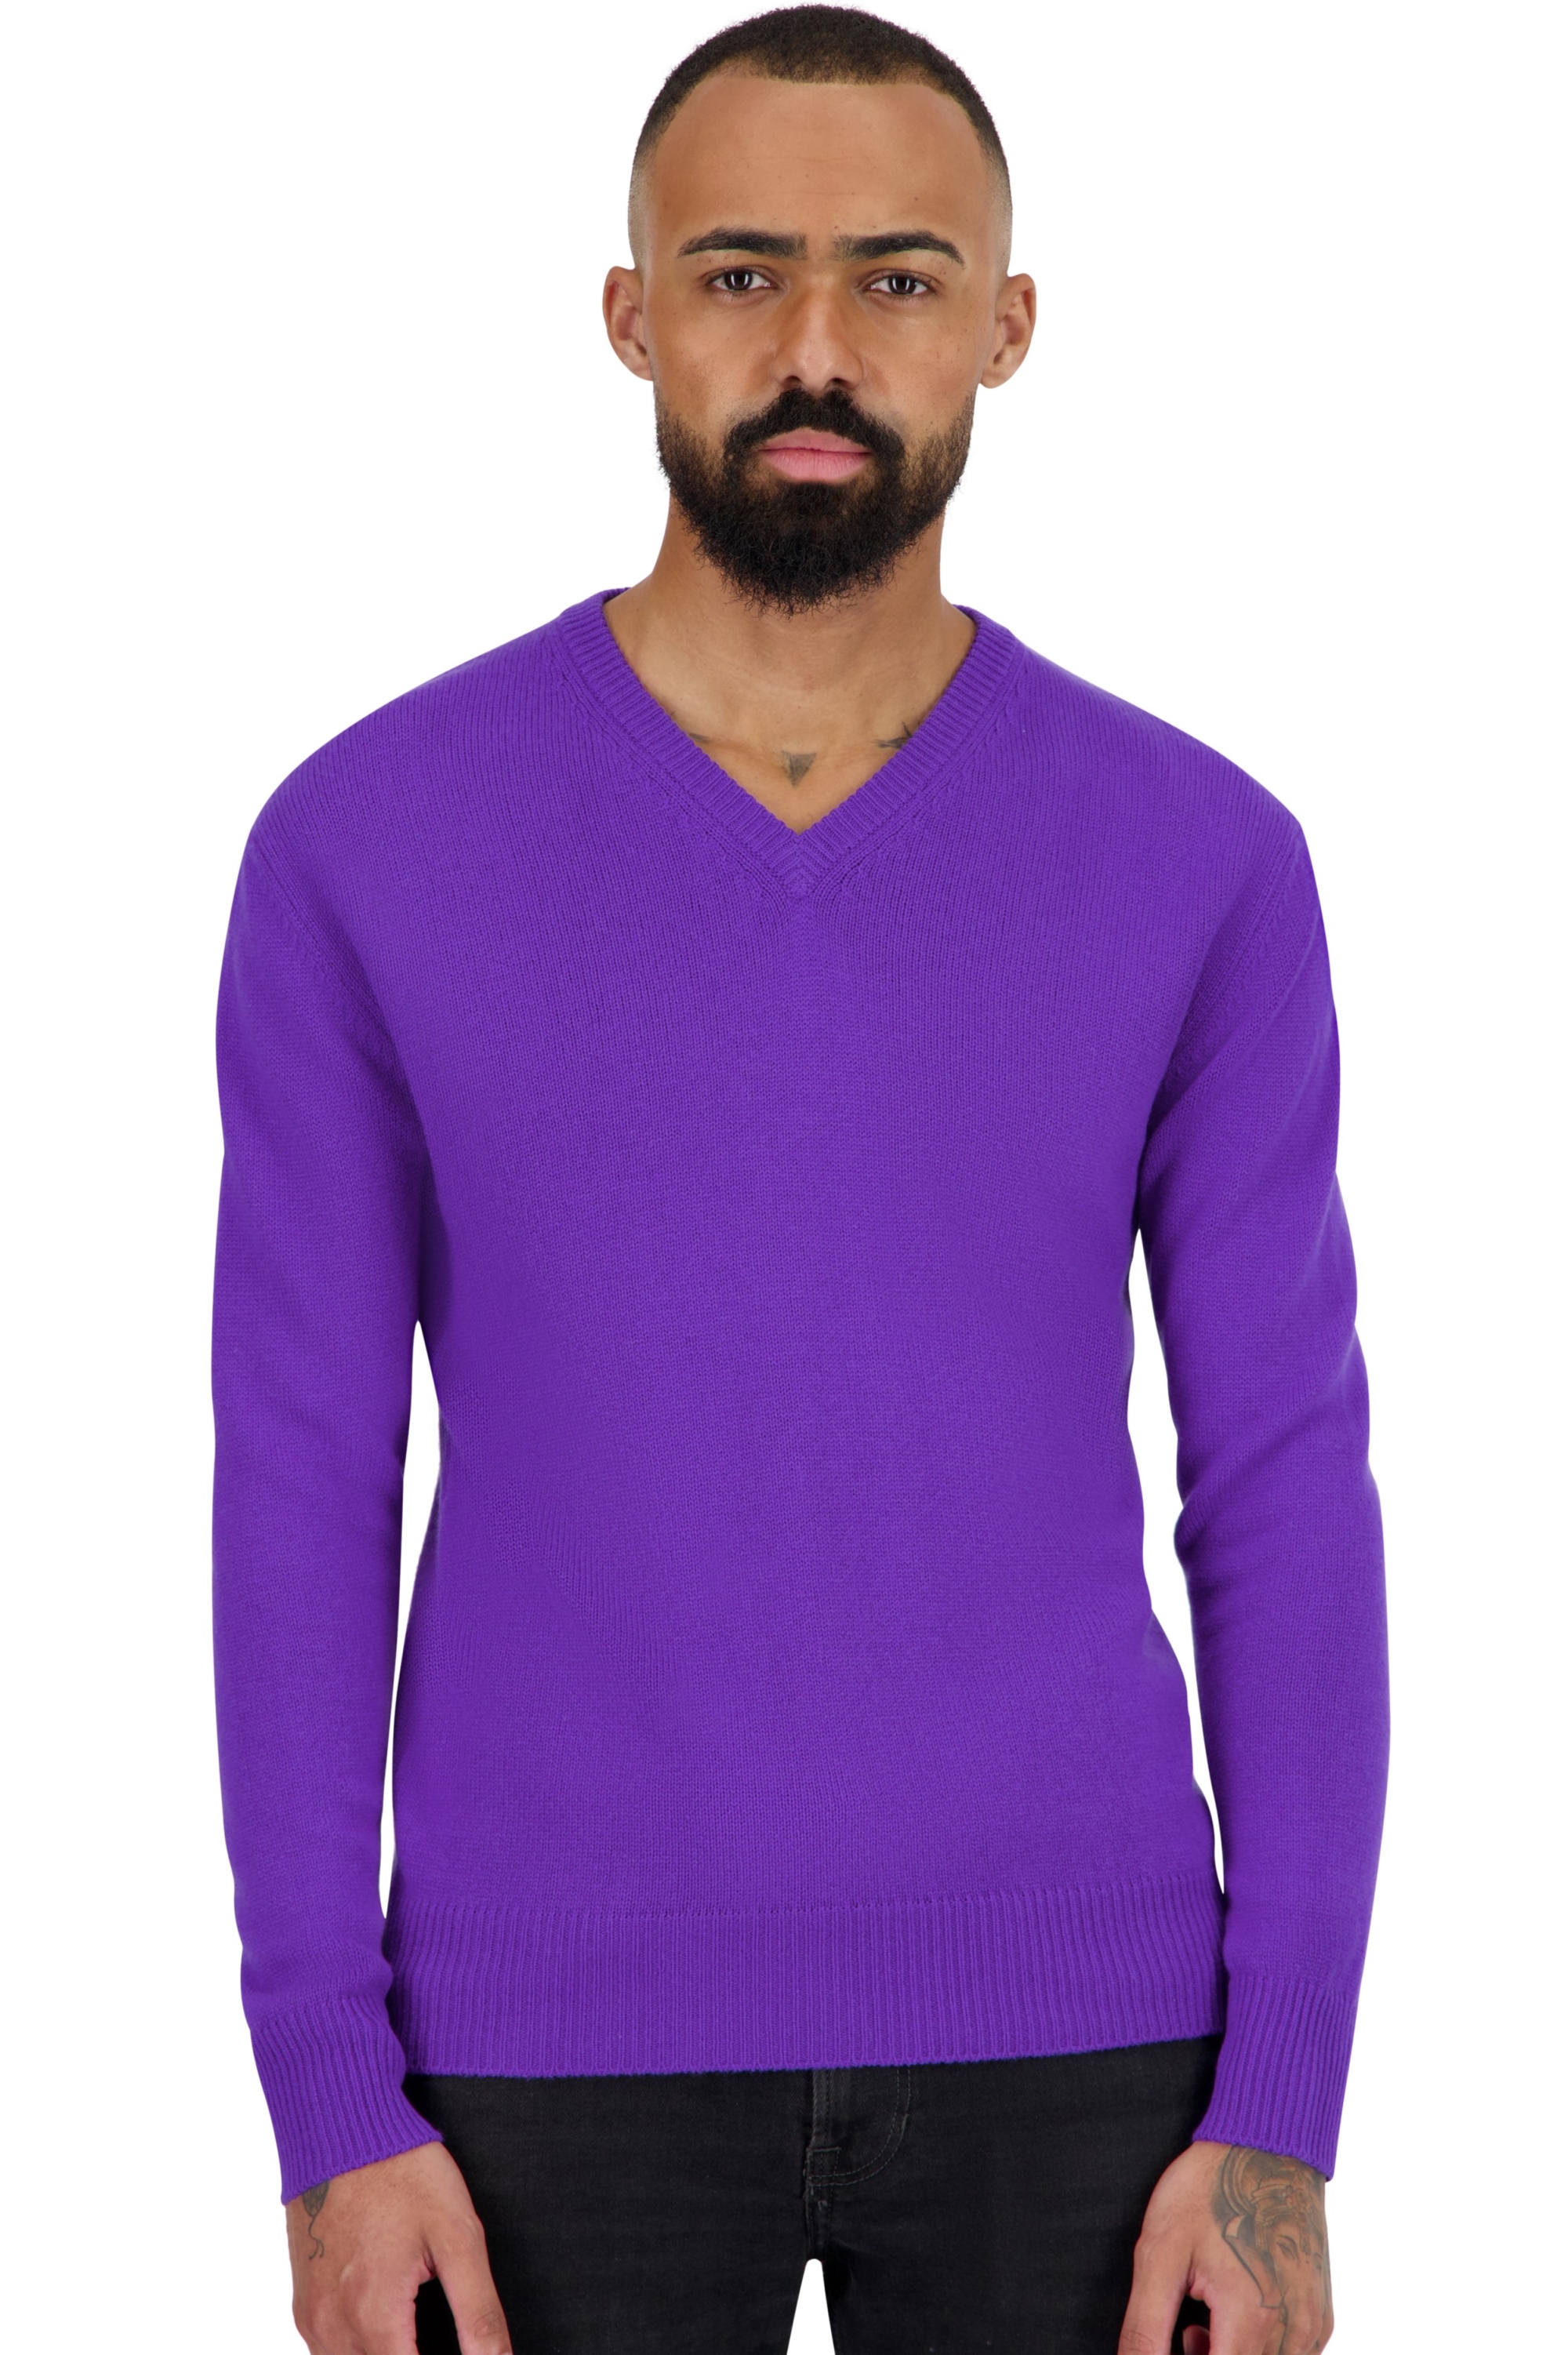 Cashmere men basic sweaters at low prices tour first regent xl